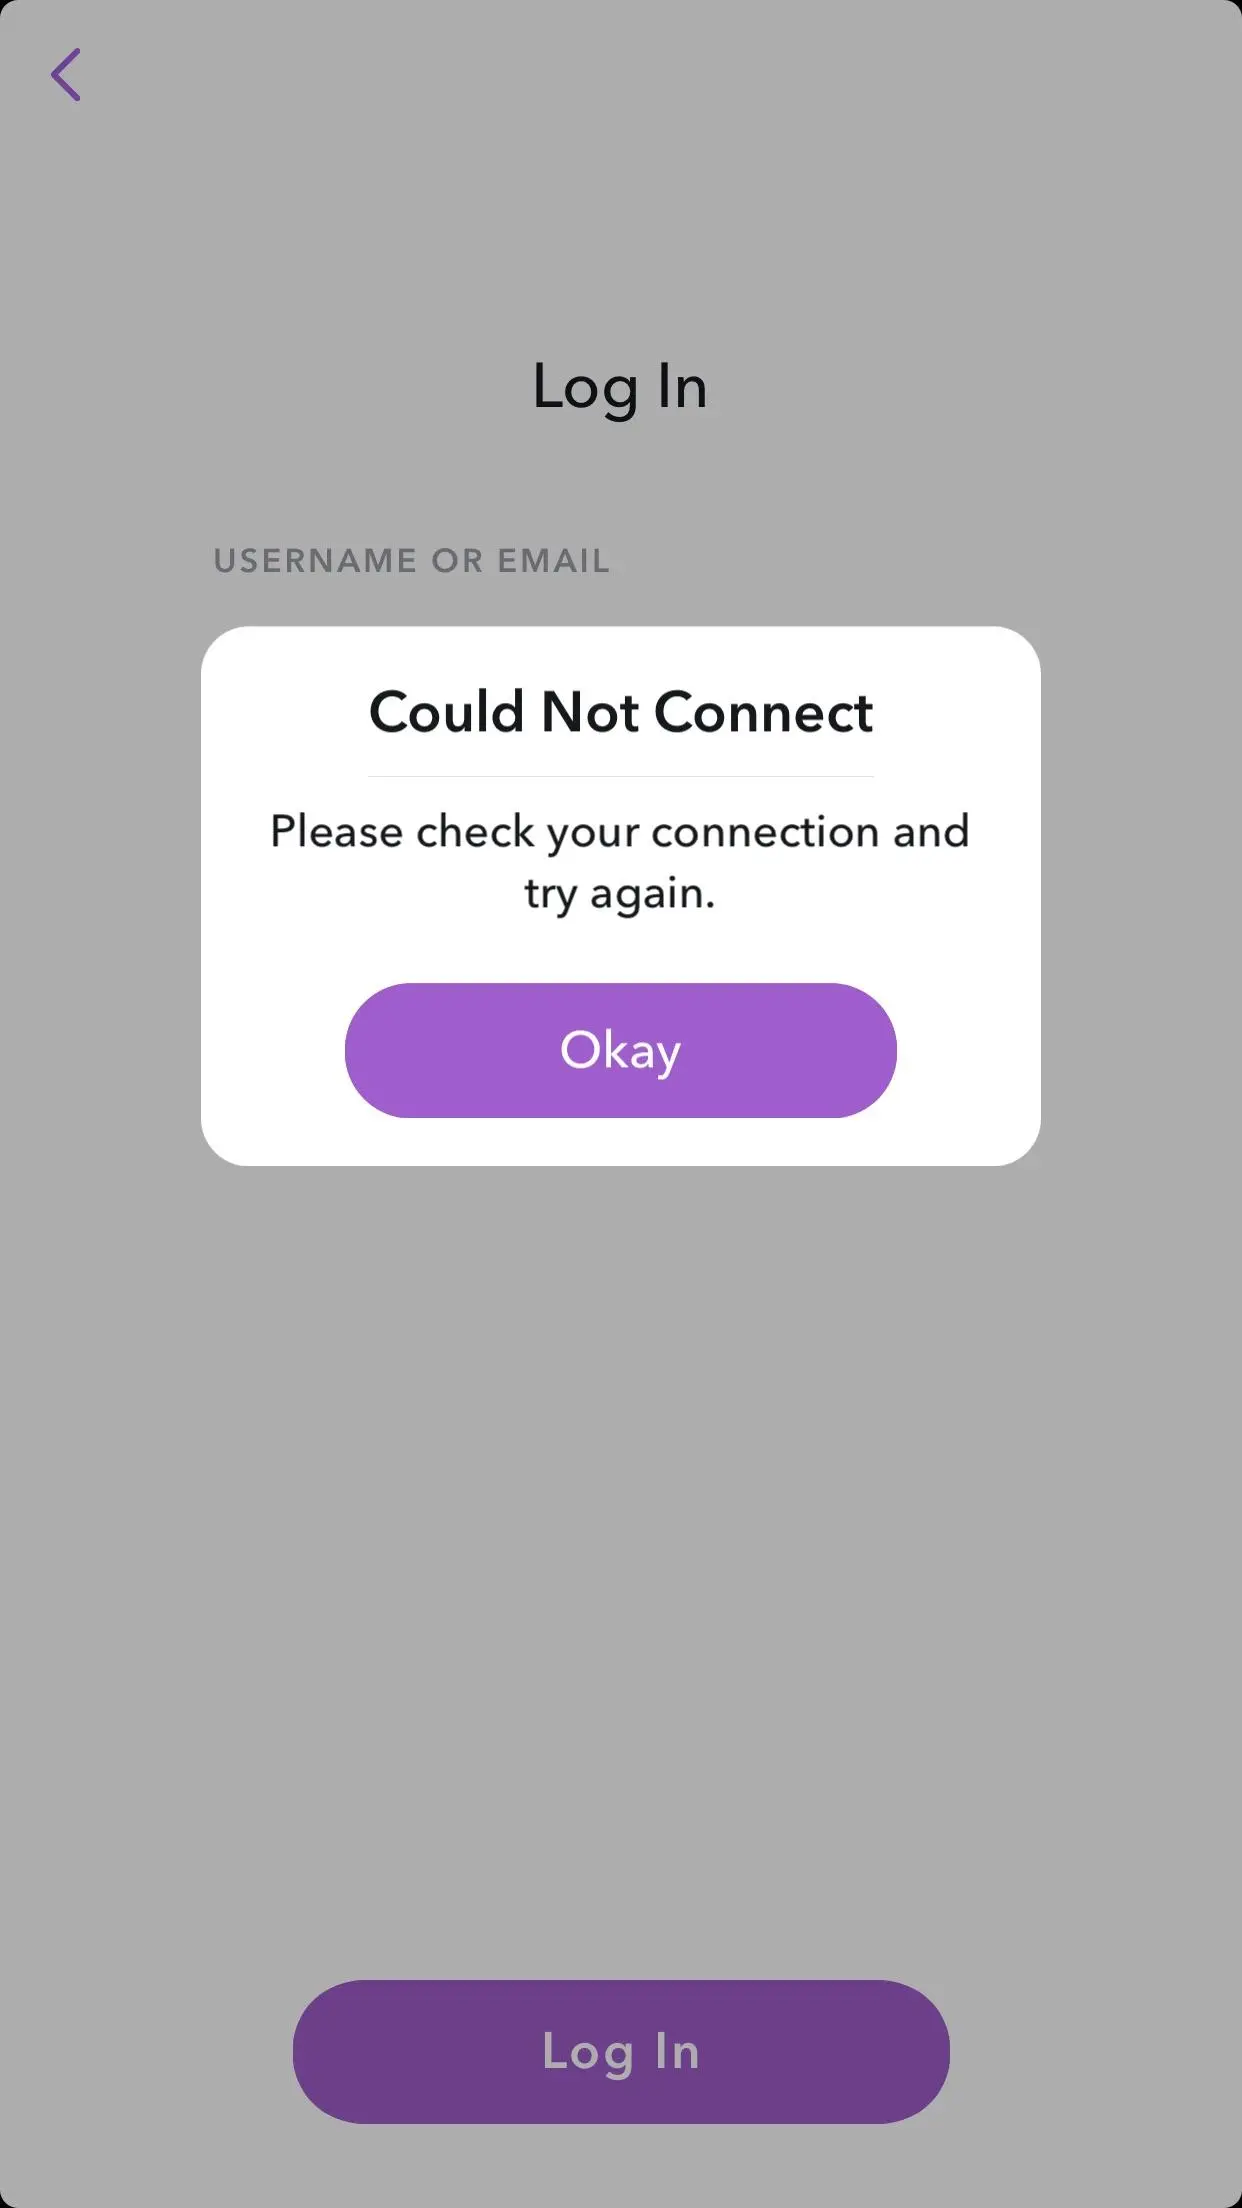 Error stating 'Could Not Connect' 